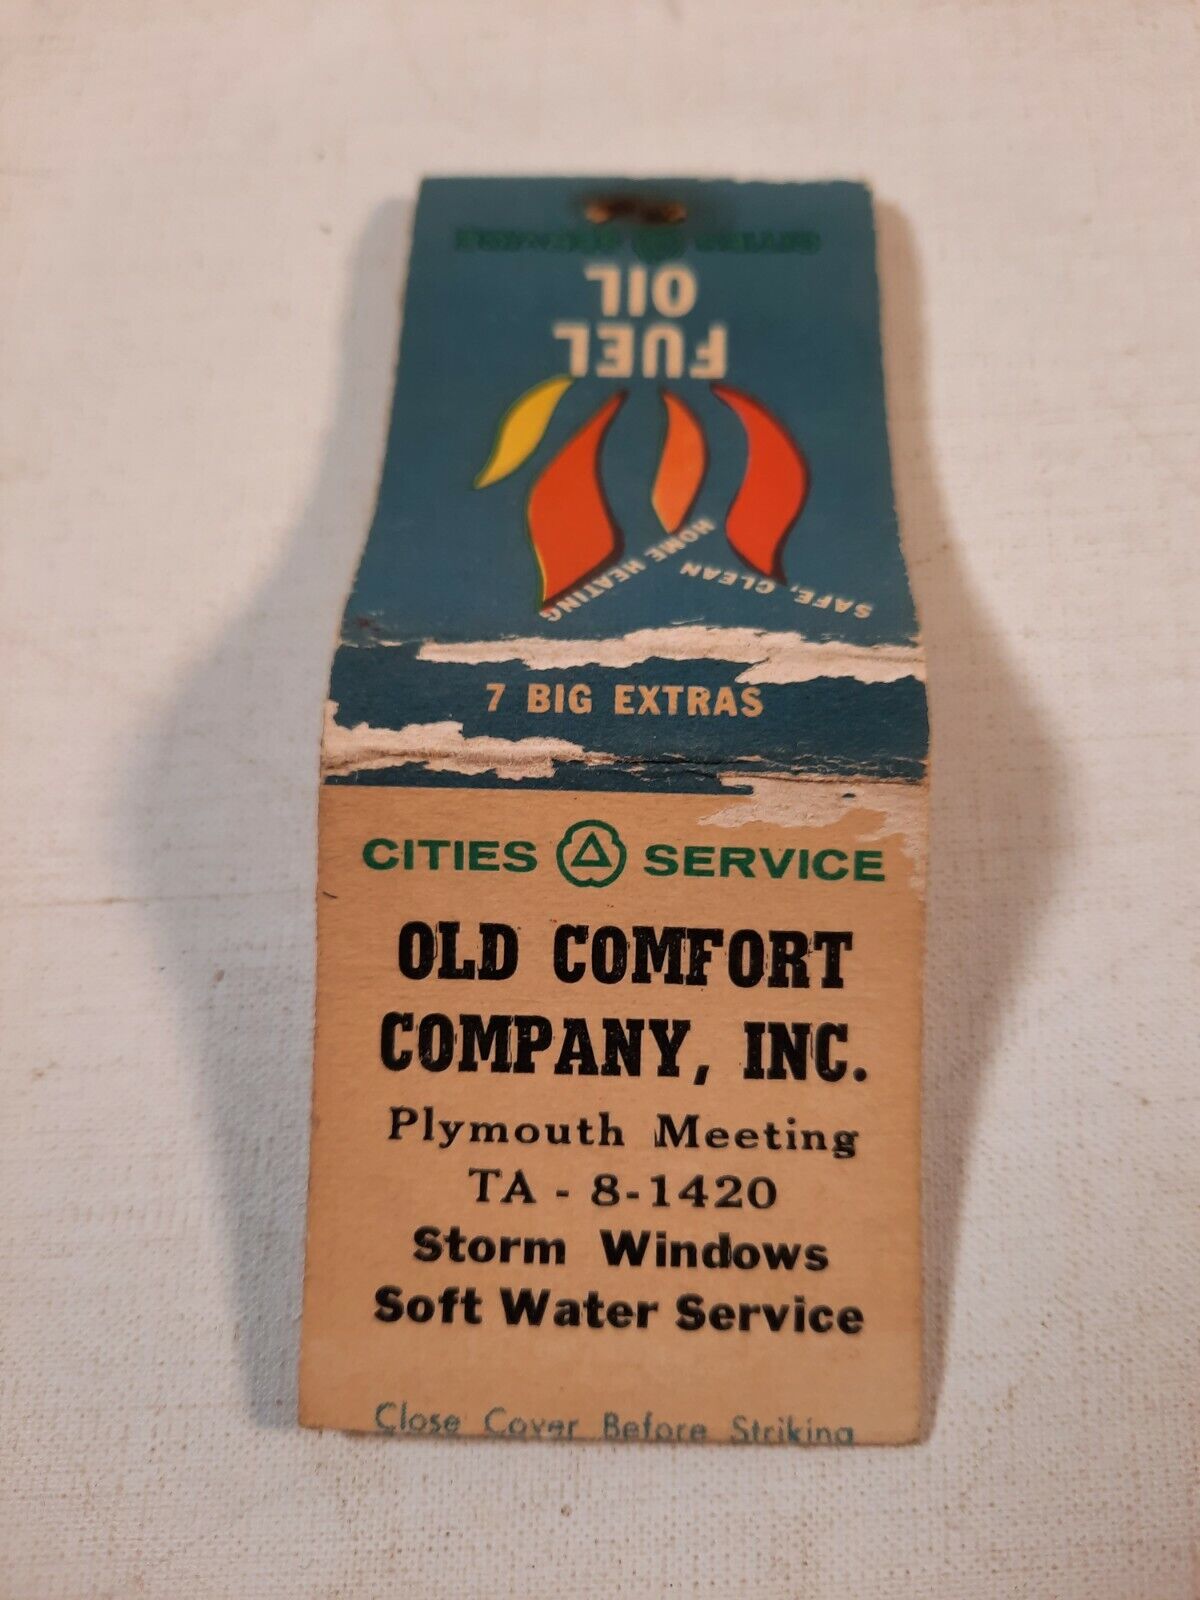 Vtg old comfort company fuel oil matchbook cover empty cities service 